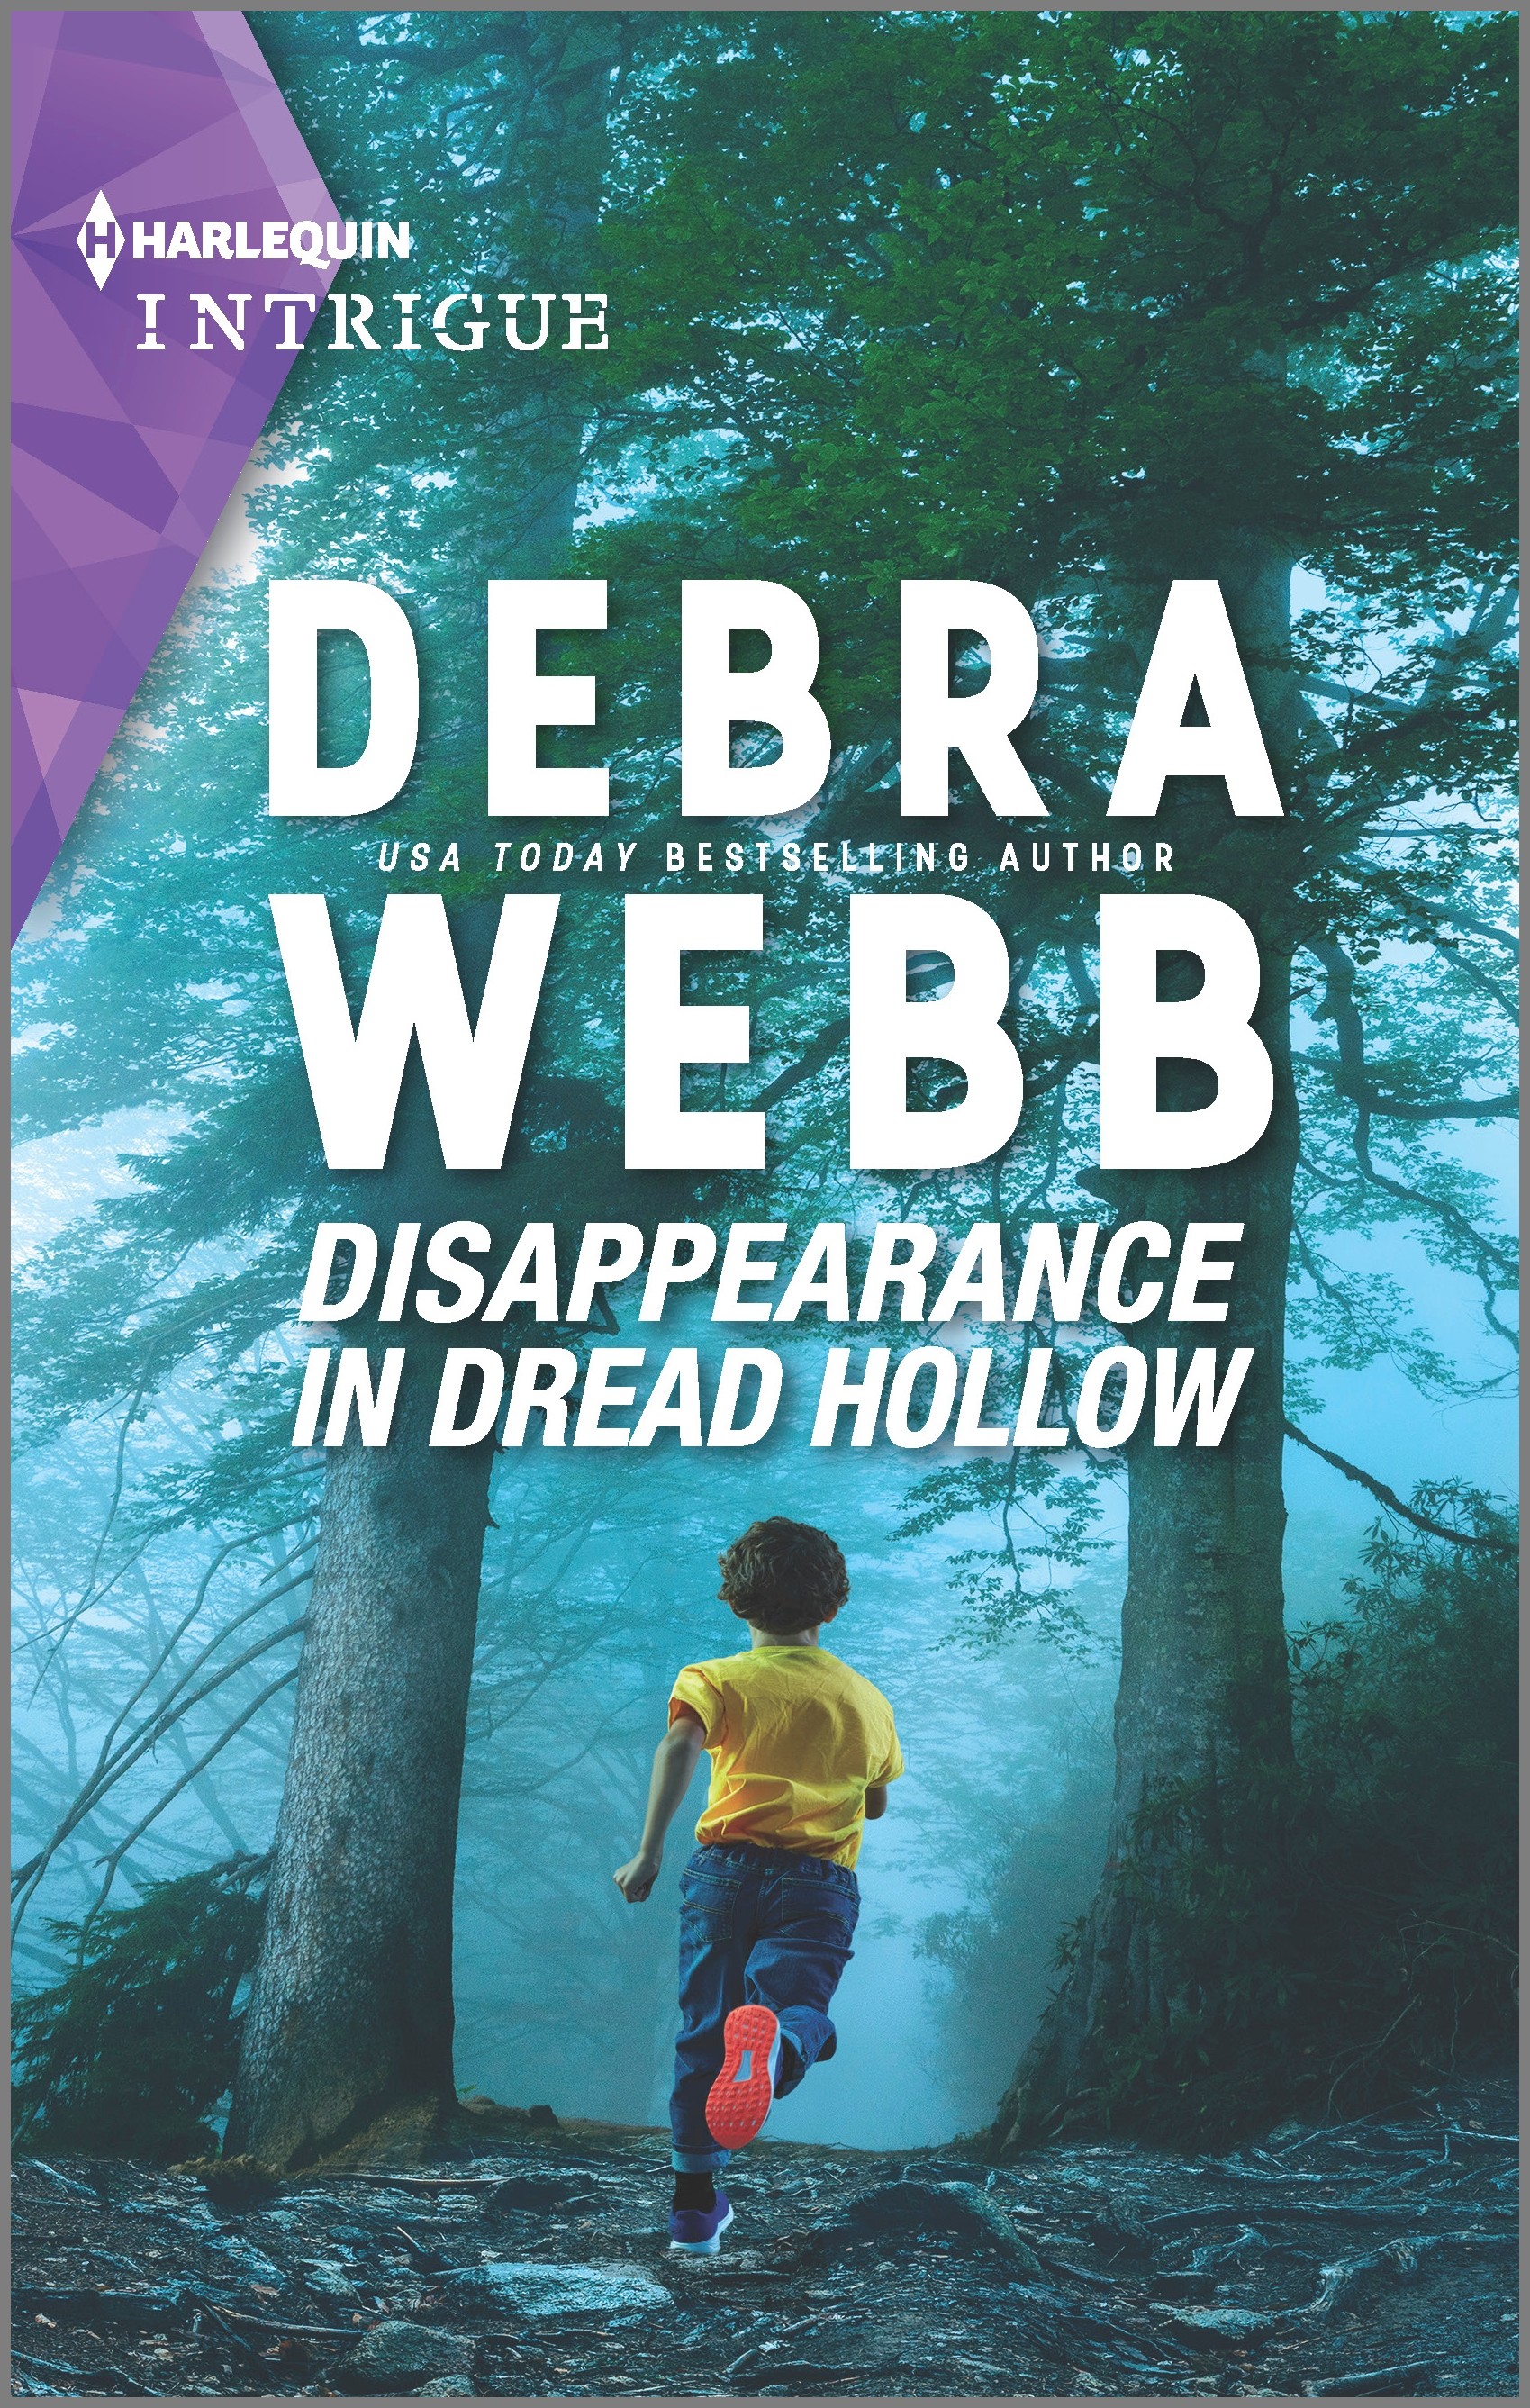 Cover image for DISAPPEARANCE IN DREAD HOLLOW by Debra Webb, featuring a child running down a path in the middle of the woods at night.